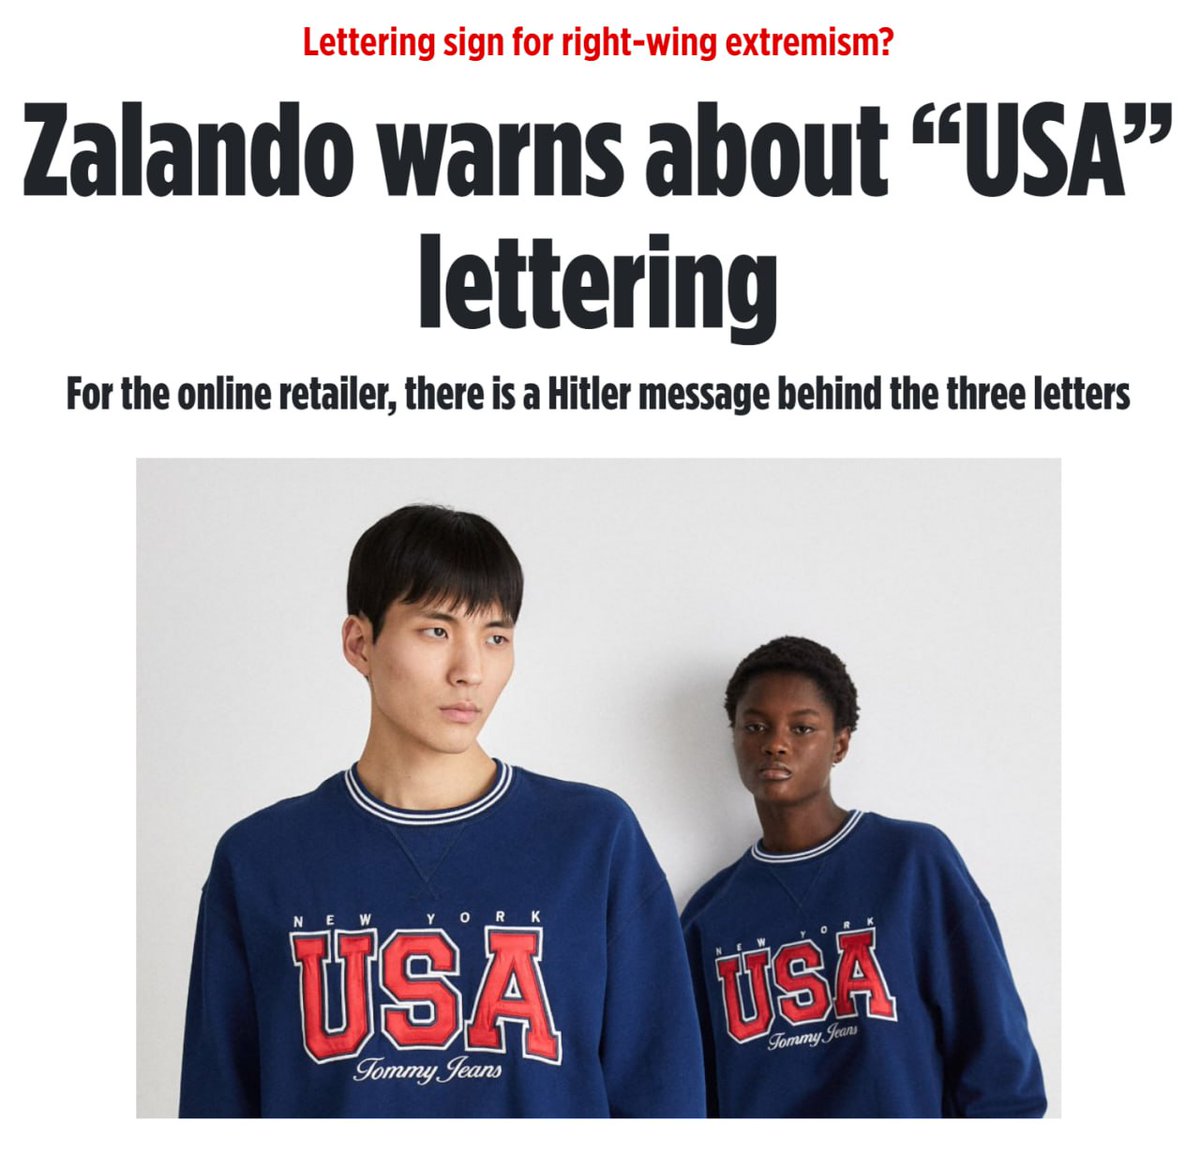 NEW - German retailer Zalando launches 'Fashion against Fascism', an online database against alleged 'Nazi codes' in fashion. About 200 abbreviations and numbers are now labeled as potential 'right-wing extremist' codes, including 'USA,' 'FAFO,' and 'Jogger.'